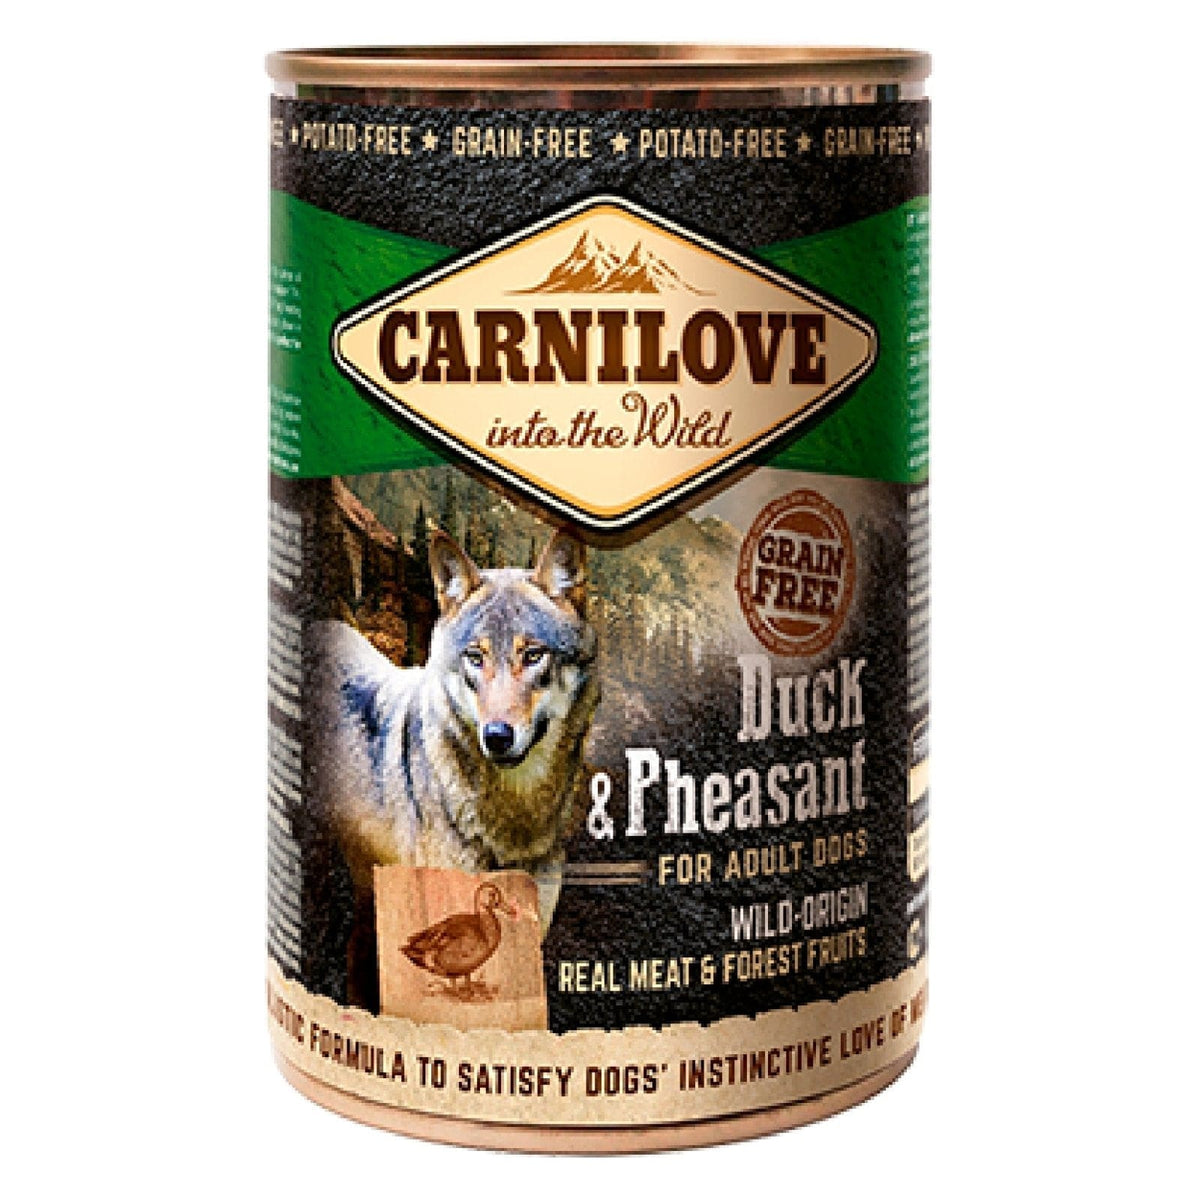 Carnilove Duck & Pheasant Wet Dog Food Cans - 6 x 400g